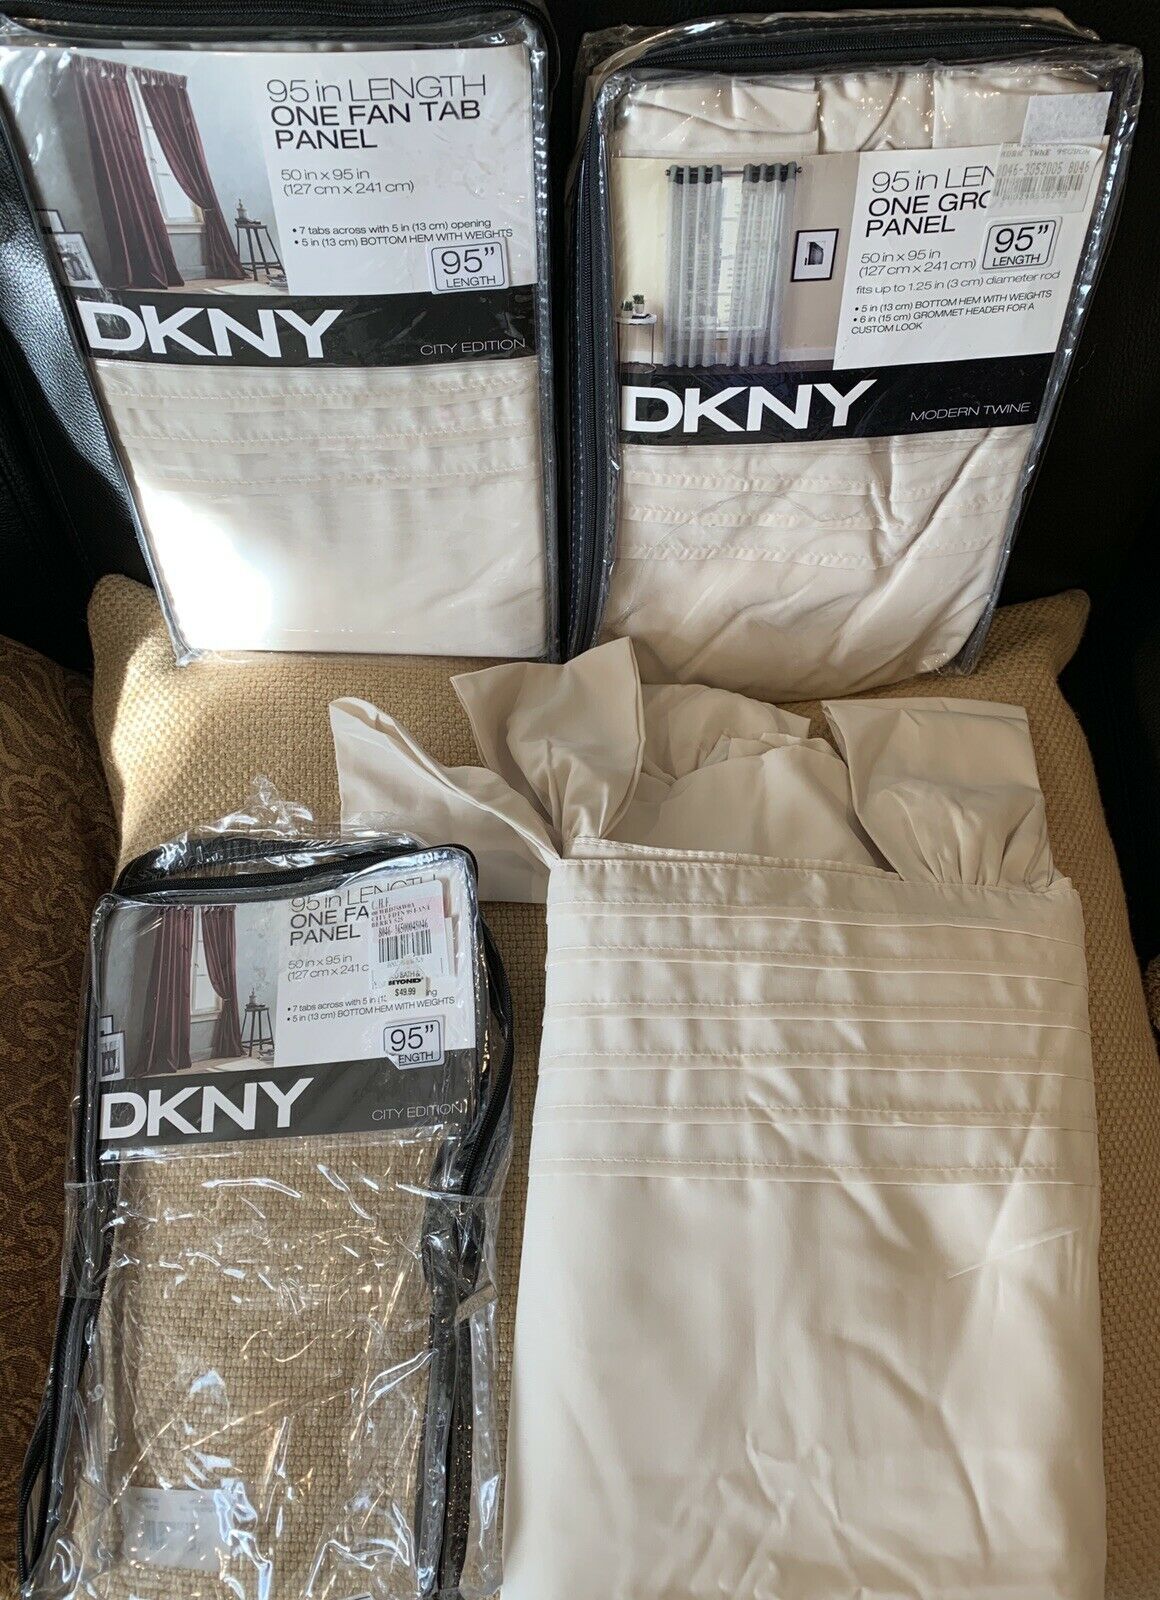 3 New Dkny City Edition Cream Window Curtain Tab Top Pleated Panels 50 X 95” Pertaining To Vue Elements Priya Tab Top Window Curtains (View 11 of 30)